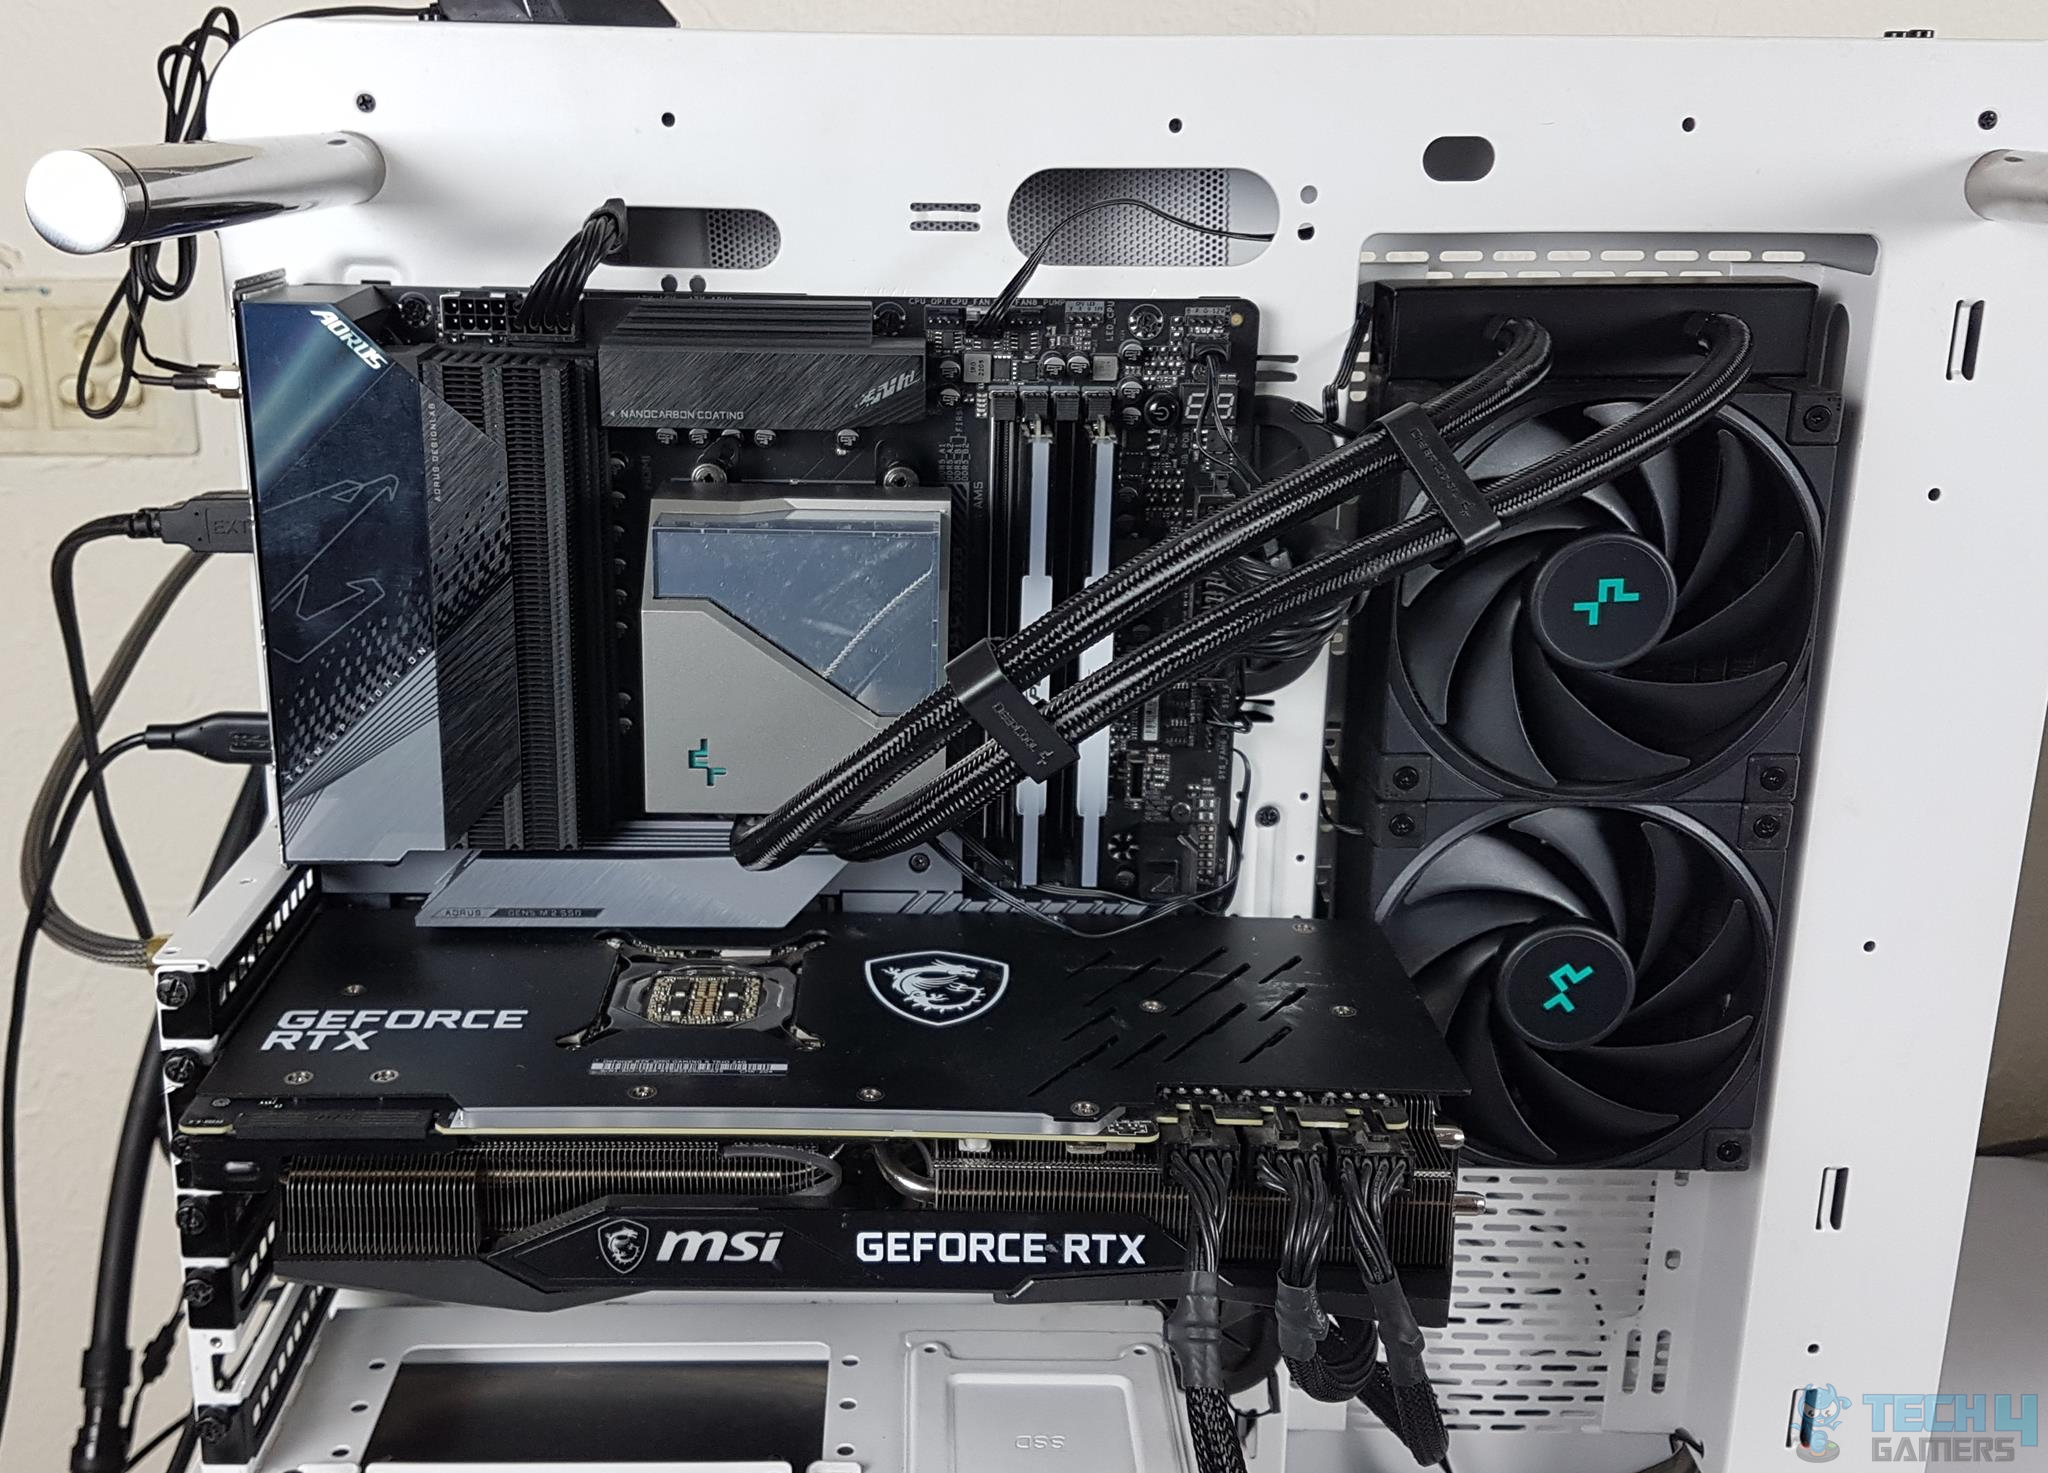 DeepCool LT520 240mm AIO [Image By Tech4Gamers]